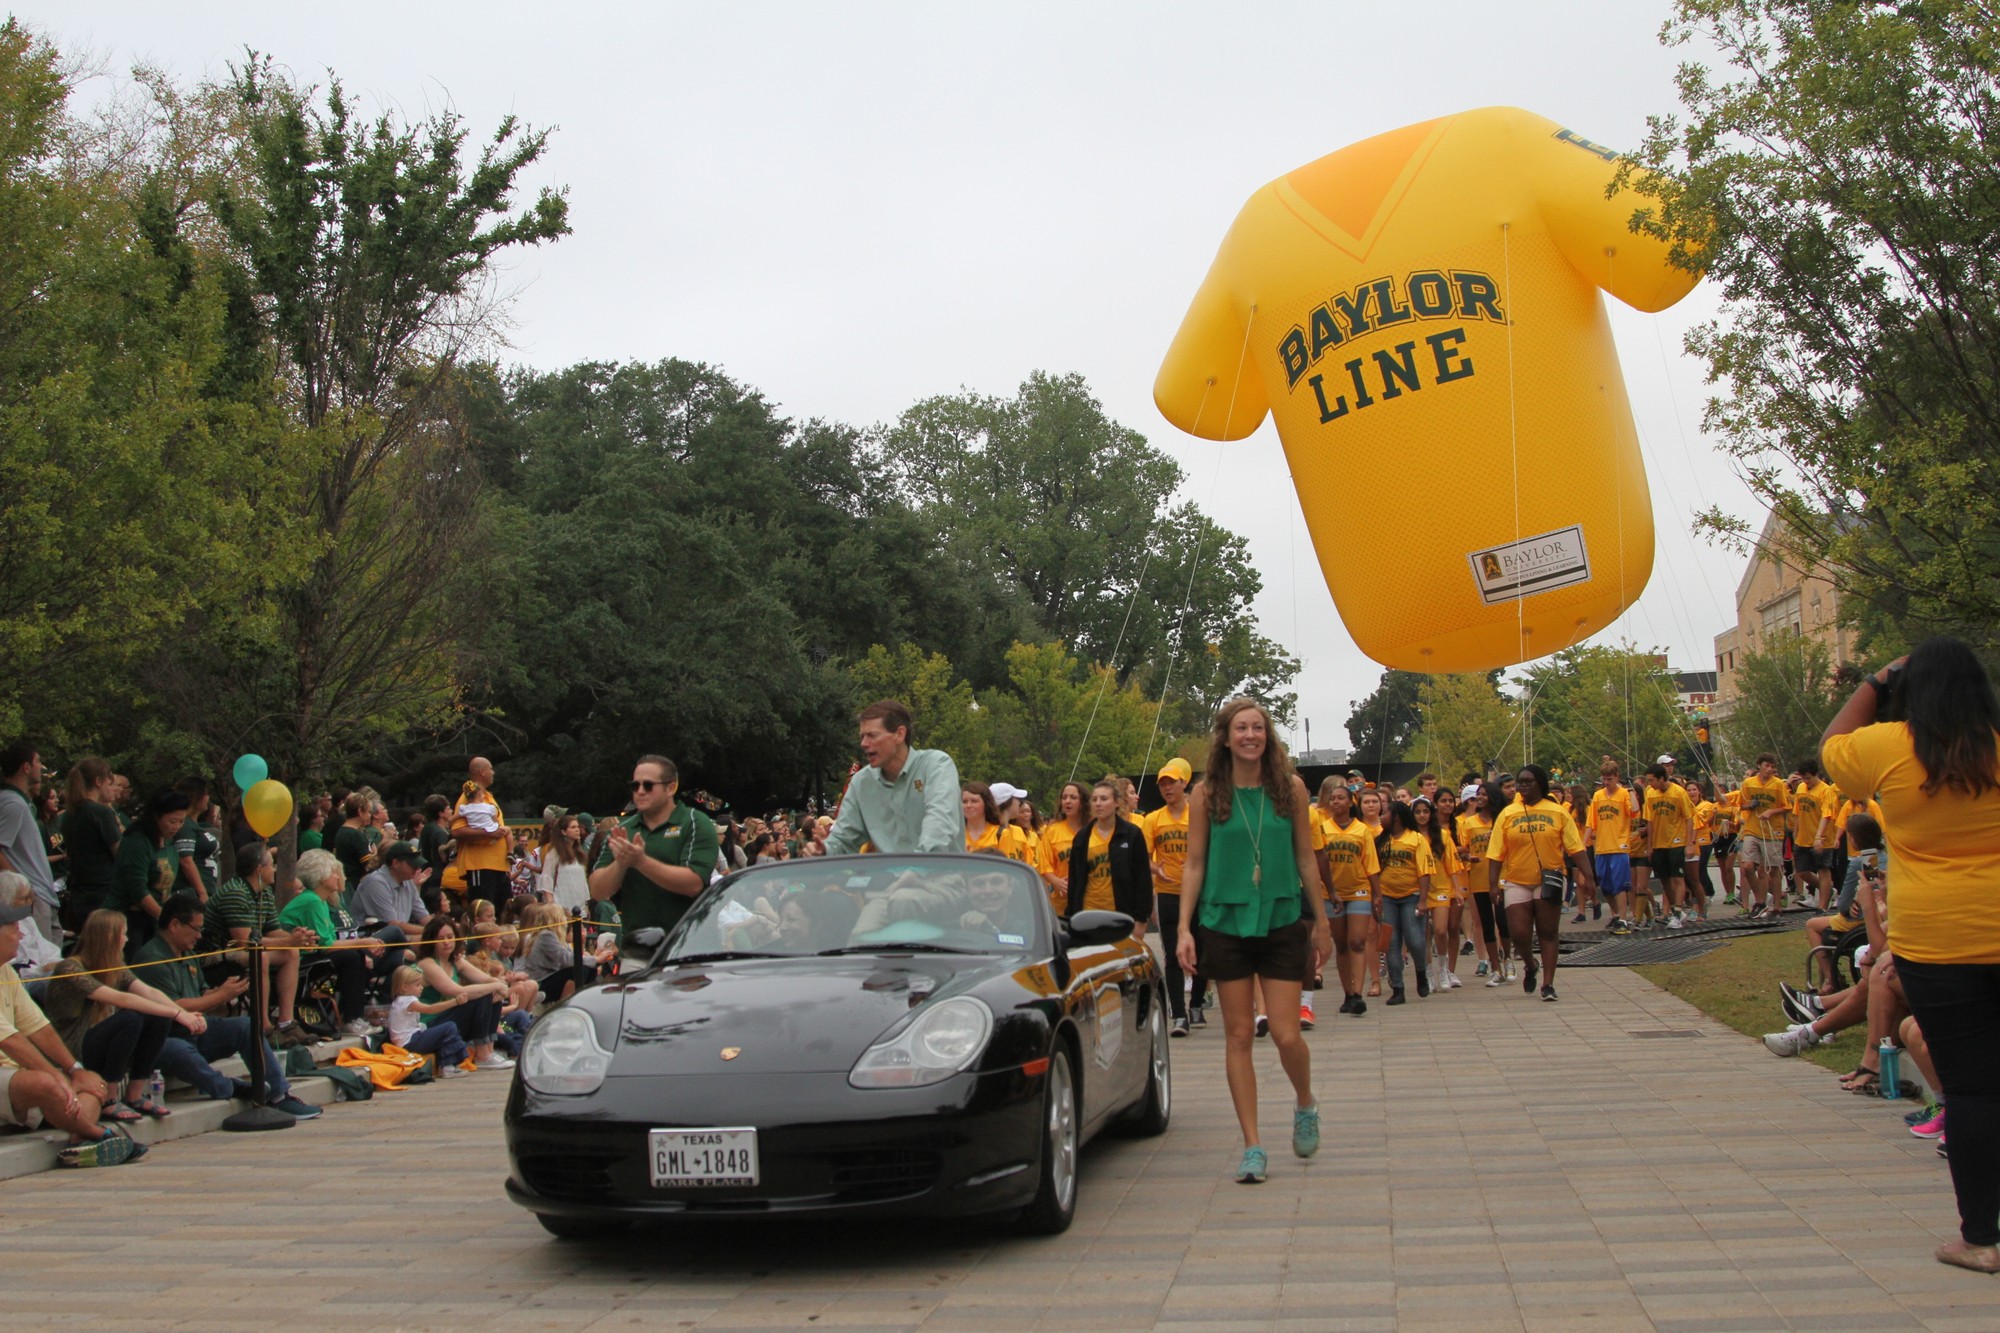 Students, alumni look forward to Baylor of giant floats